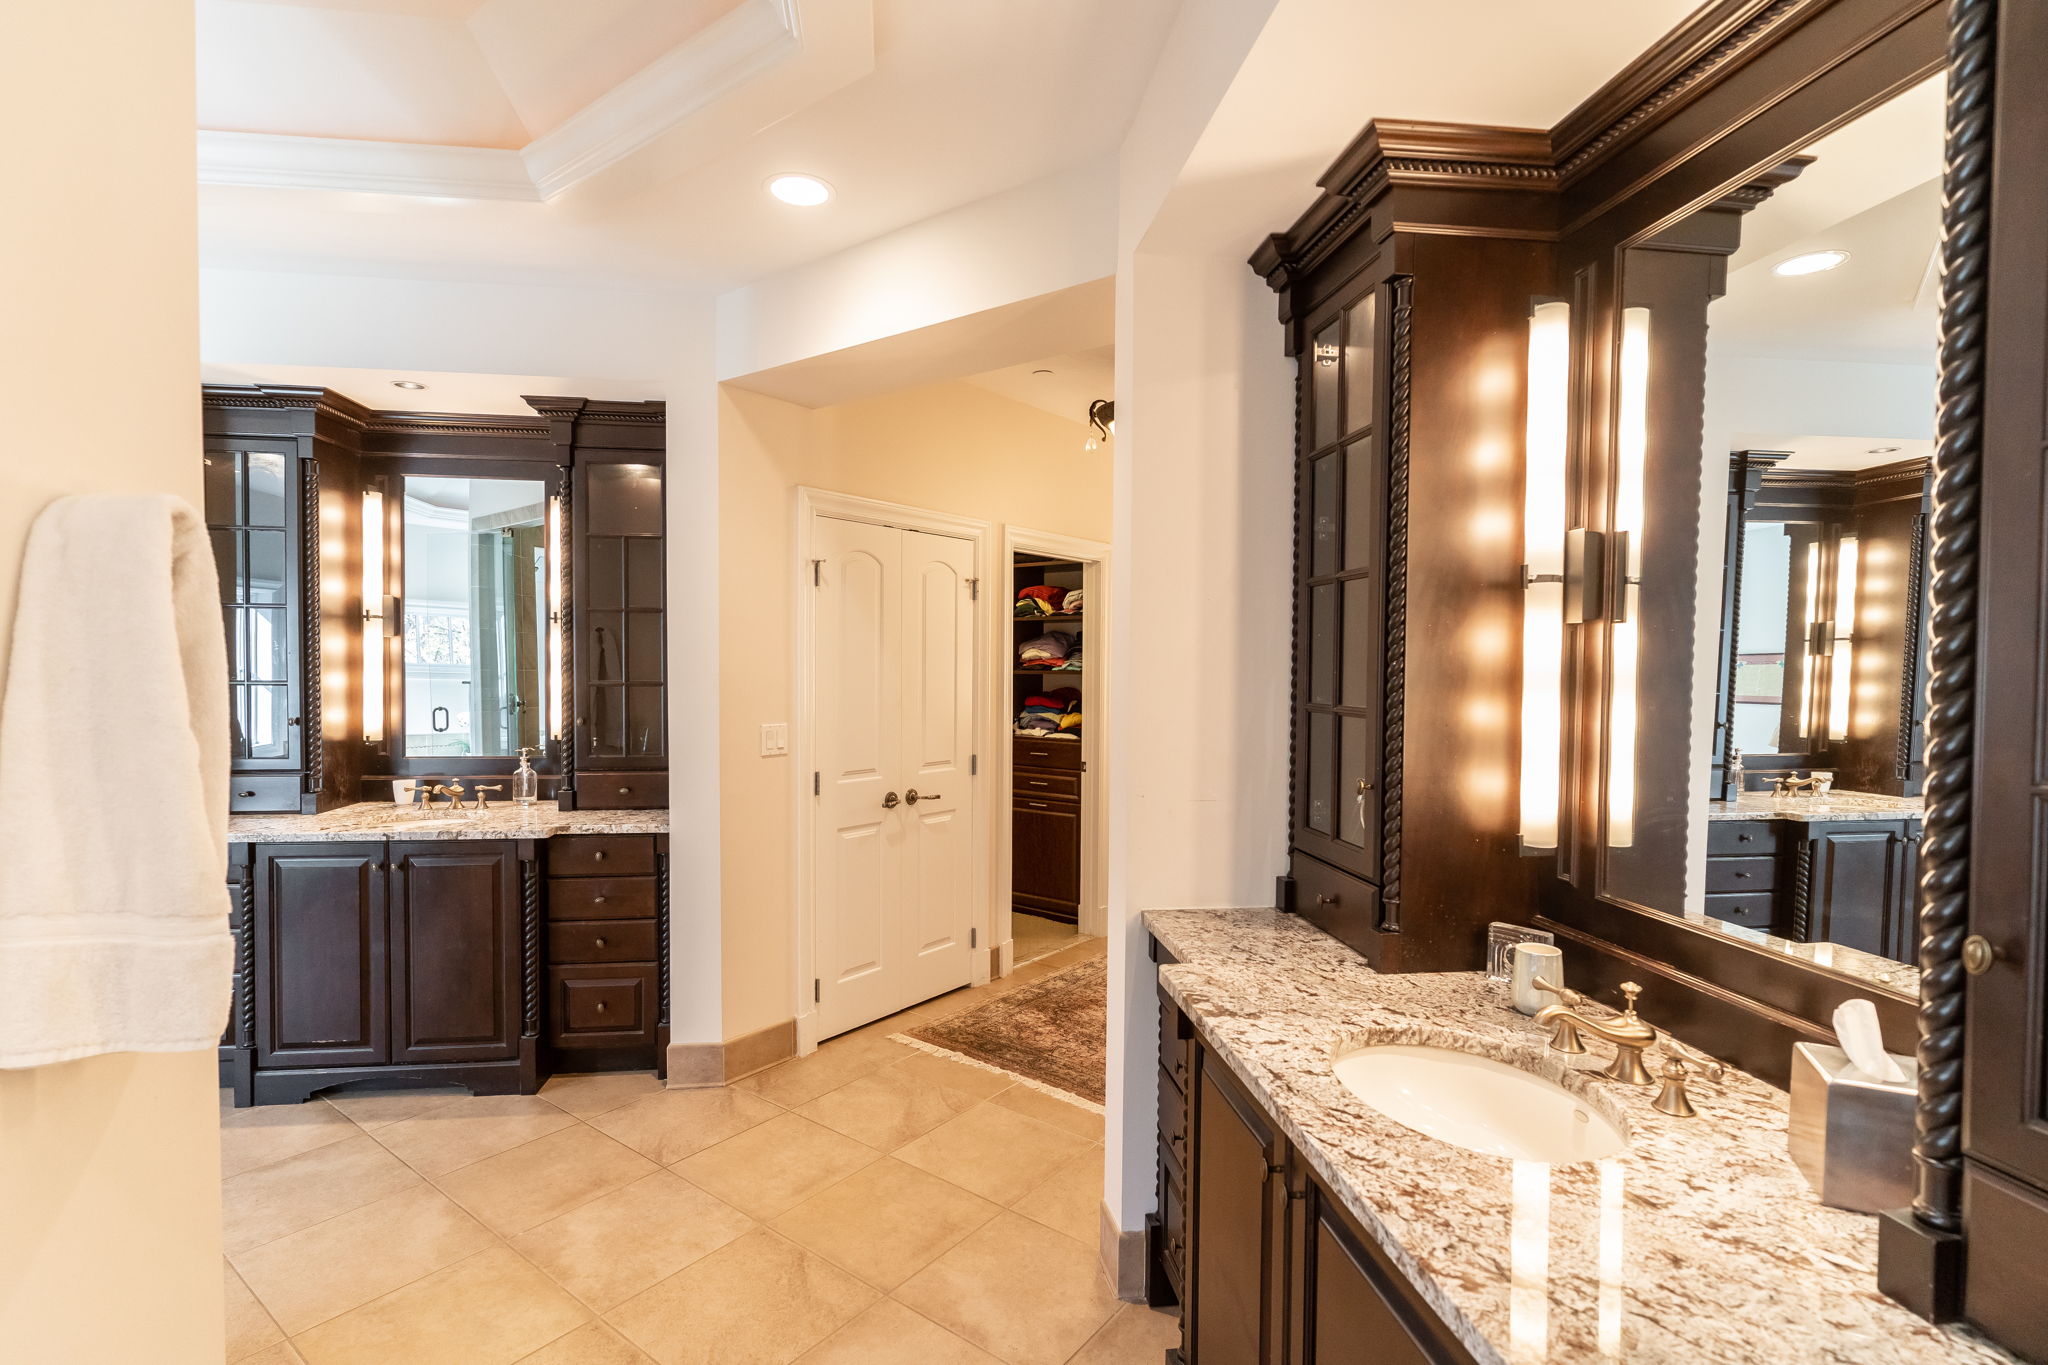 Primary Suite Dual Vanities, Makeup Vanity and Two Expansive Custom Closets